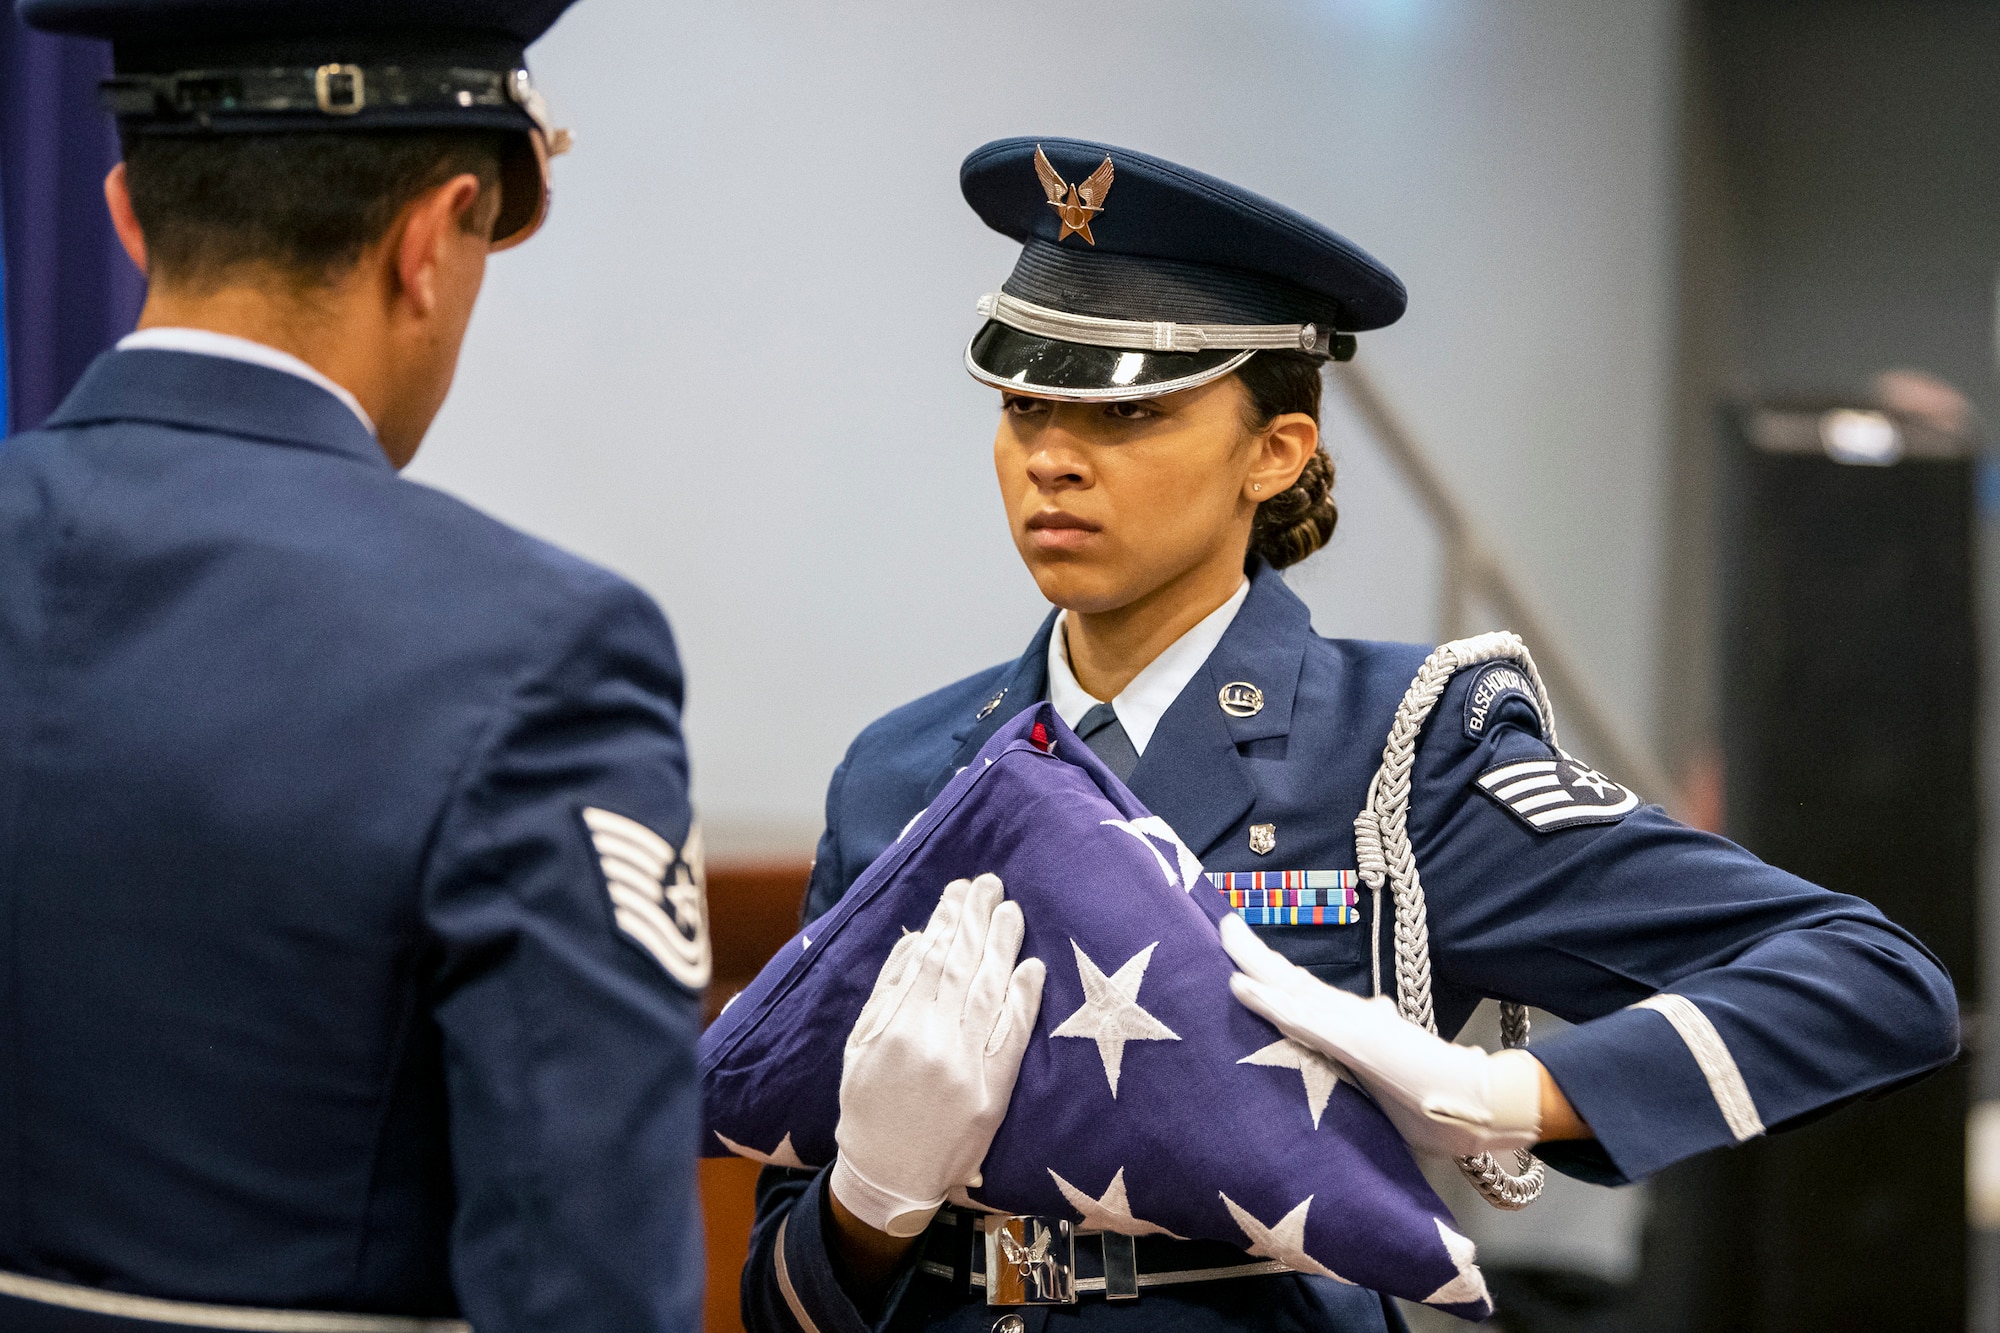 An Airman from the 422d Air Base Group honor guard, dresses a flag during a 9/11 retreat ceremony at RAF Croughton, England, Sep. 9, 2022. Airmen and guests participated in the ceremony to honor those who lost their lives during the September 11th terrorist attacks. (U.S. Air Force photo by Staff Sgt. Eugene Oliver)